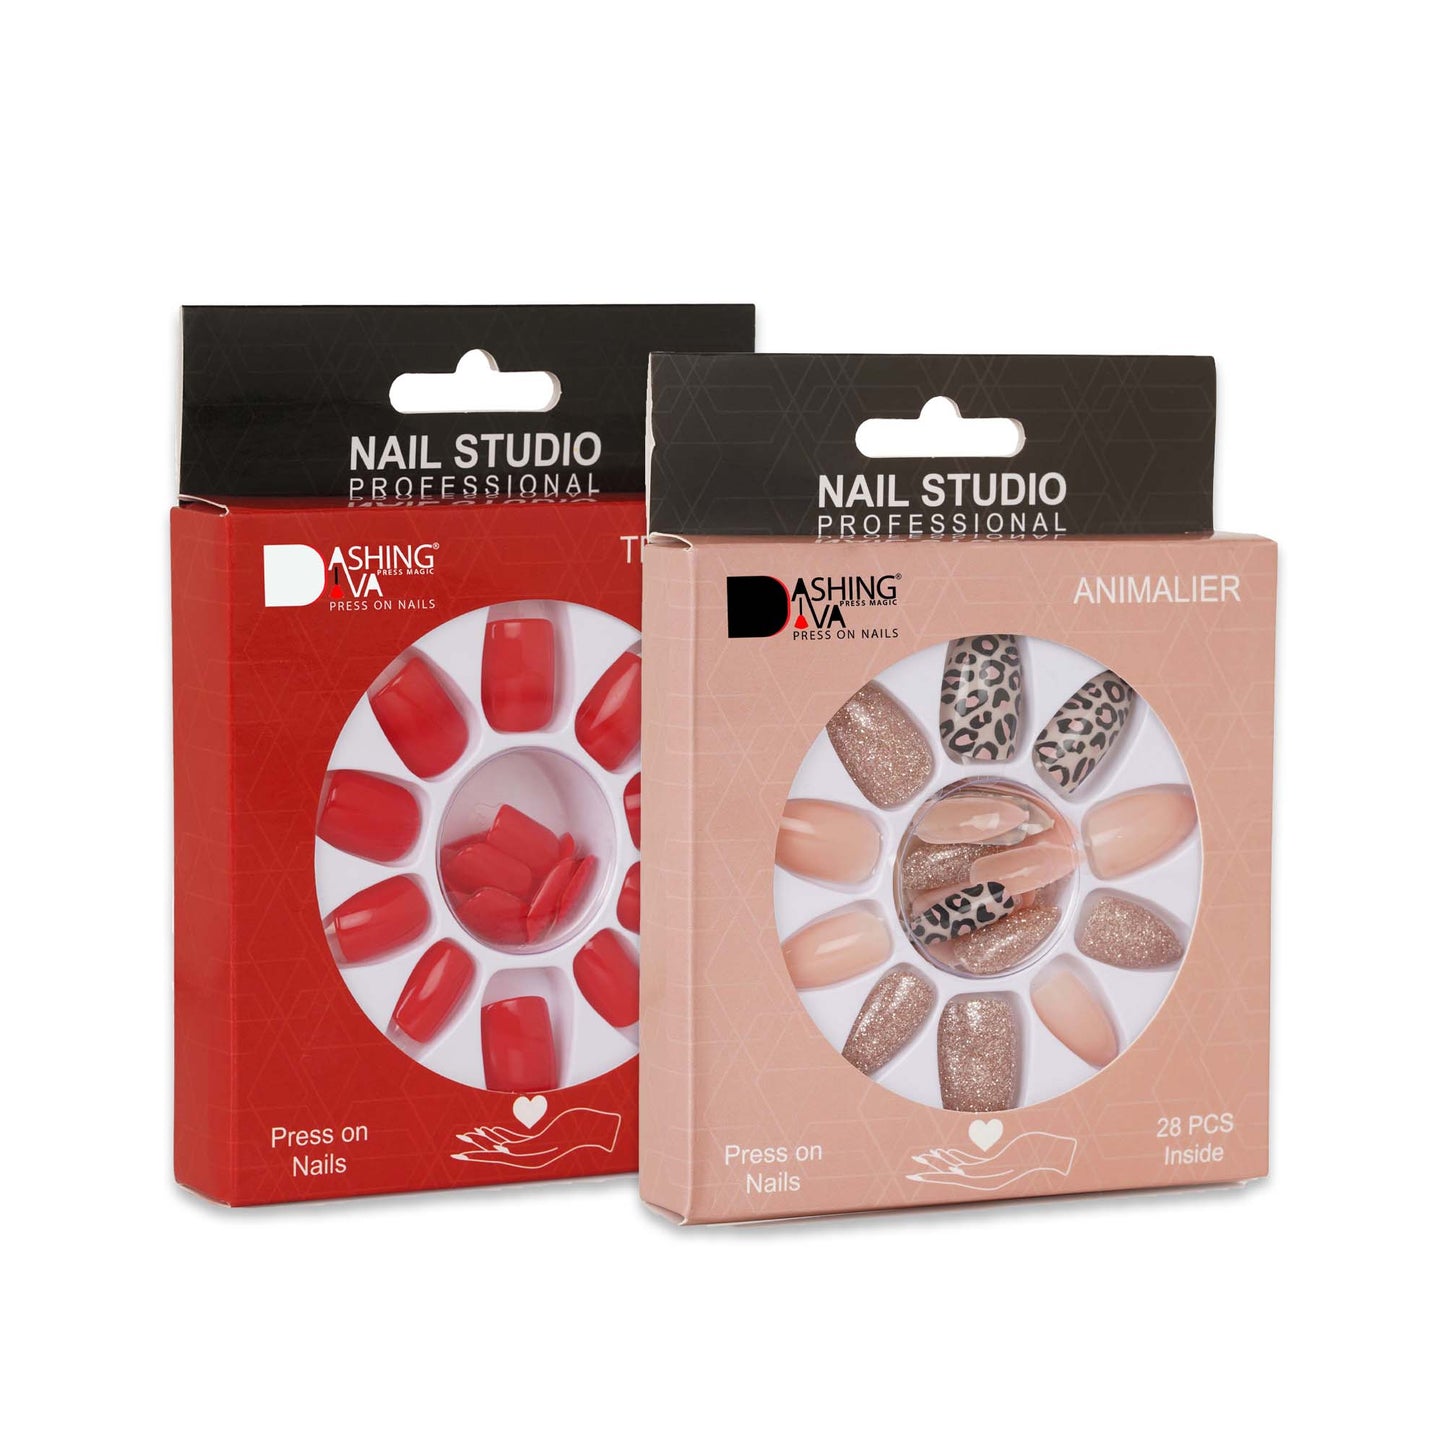 Stick On Nails | Dashing Diva Press Magic Animalier, True Red Nail Art Nail Extension Acrylic Press on Nails With Quick Dry Nail Glue, Pack of 2